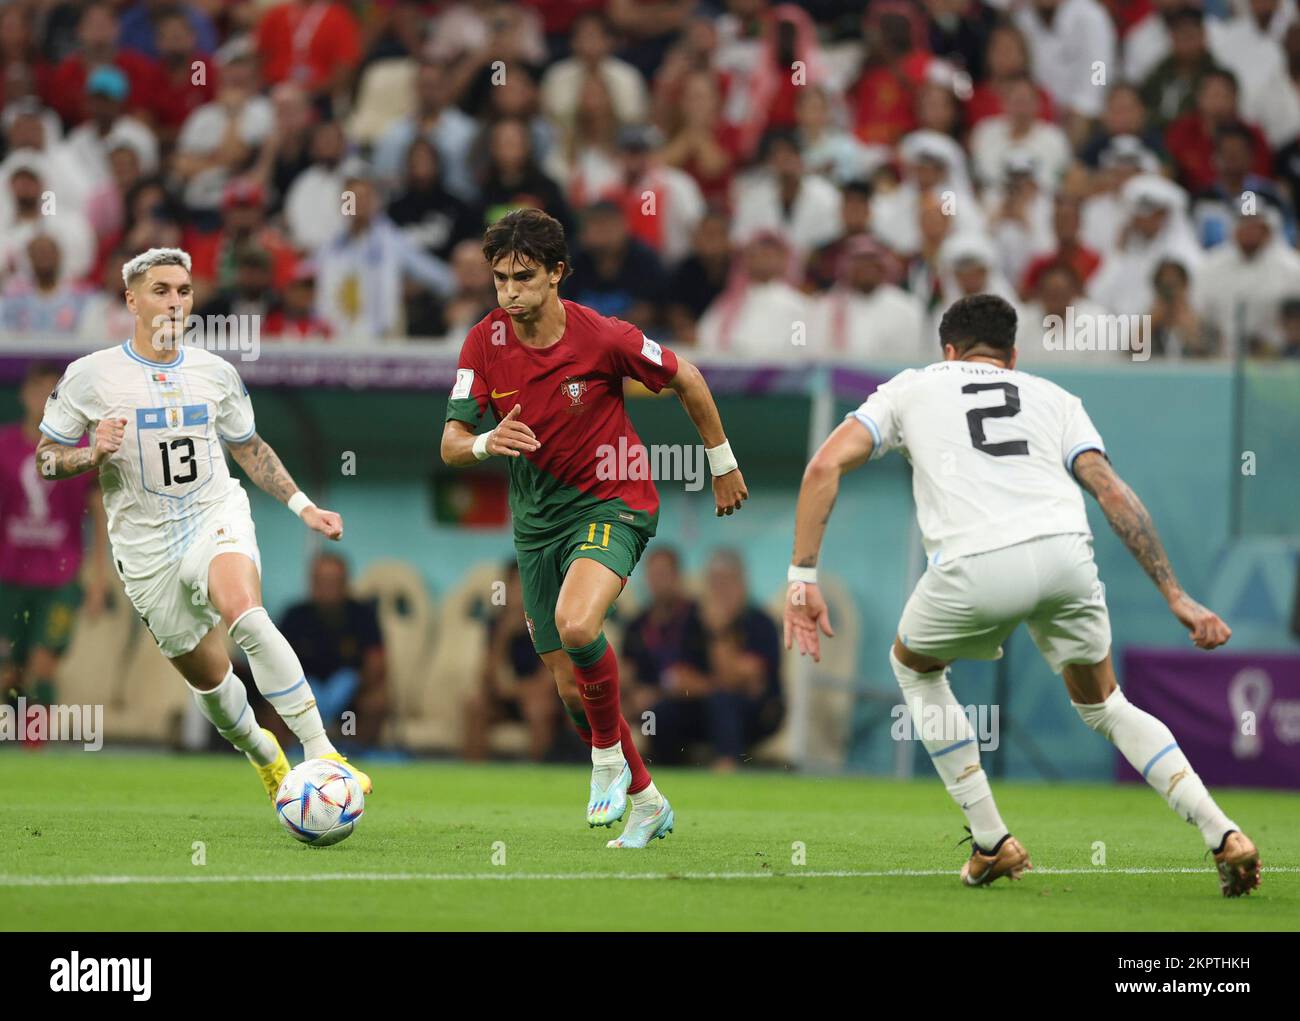 Lusail, Qatar. 28th Nov, 2022. Guillermo Varela (L) and Jose Maria Gimenez (R) of Uruguay vies with Joao Felix of Portugal during the Group H match between Portugal and Uruguay at the 2022 FIFA World Cup at Lusail Stadium in Lusail, Qatar, Nov. 28, 2022. Credit: Pan Yulong/Xinhua/Alamy Live News Stock Photo